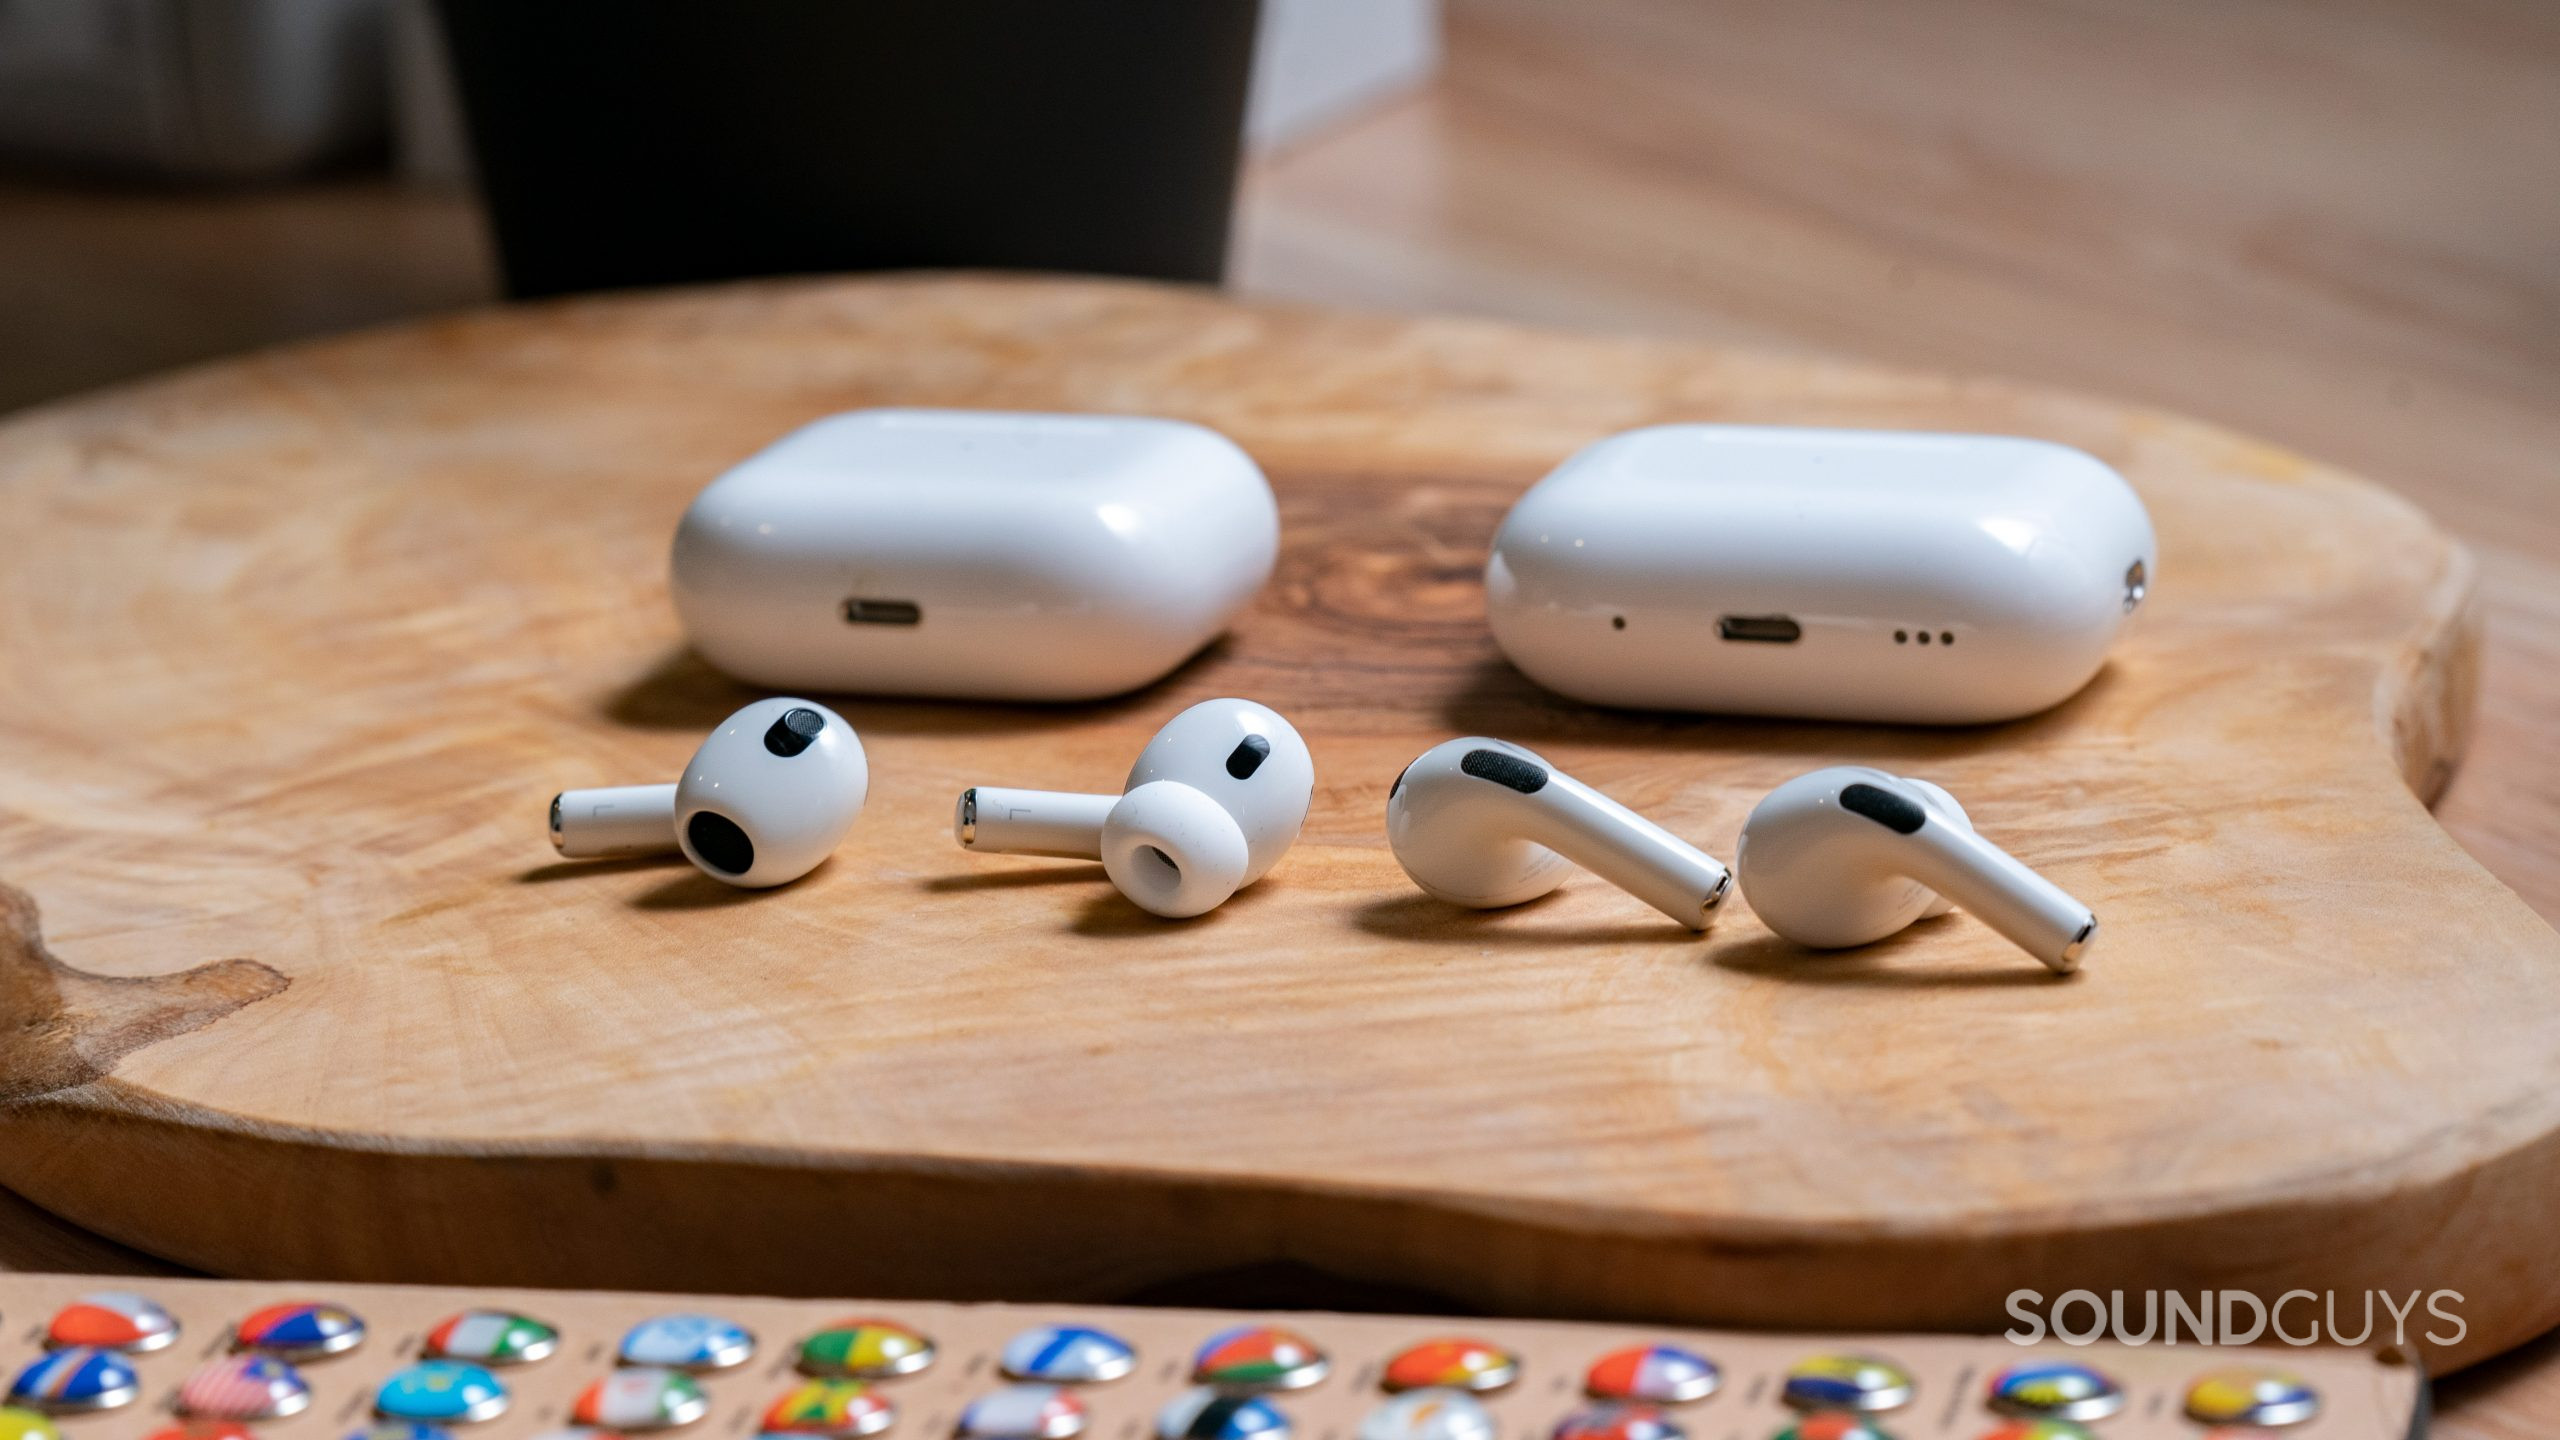 New AirPods Pro review: A must buy, even if you have the older Pros